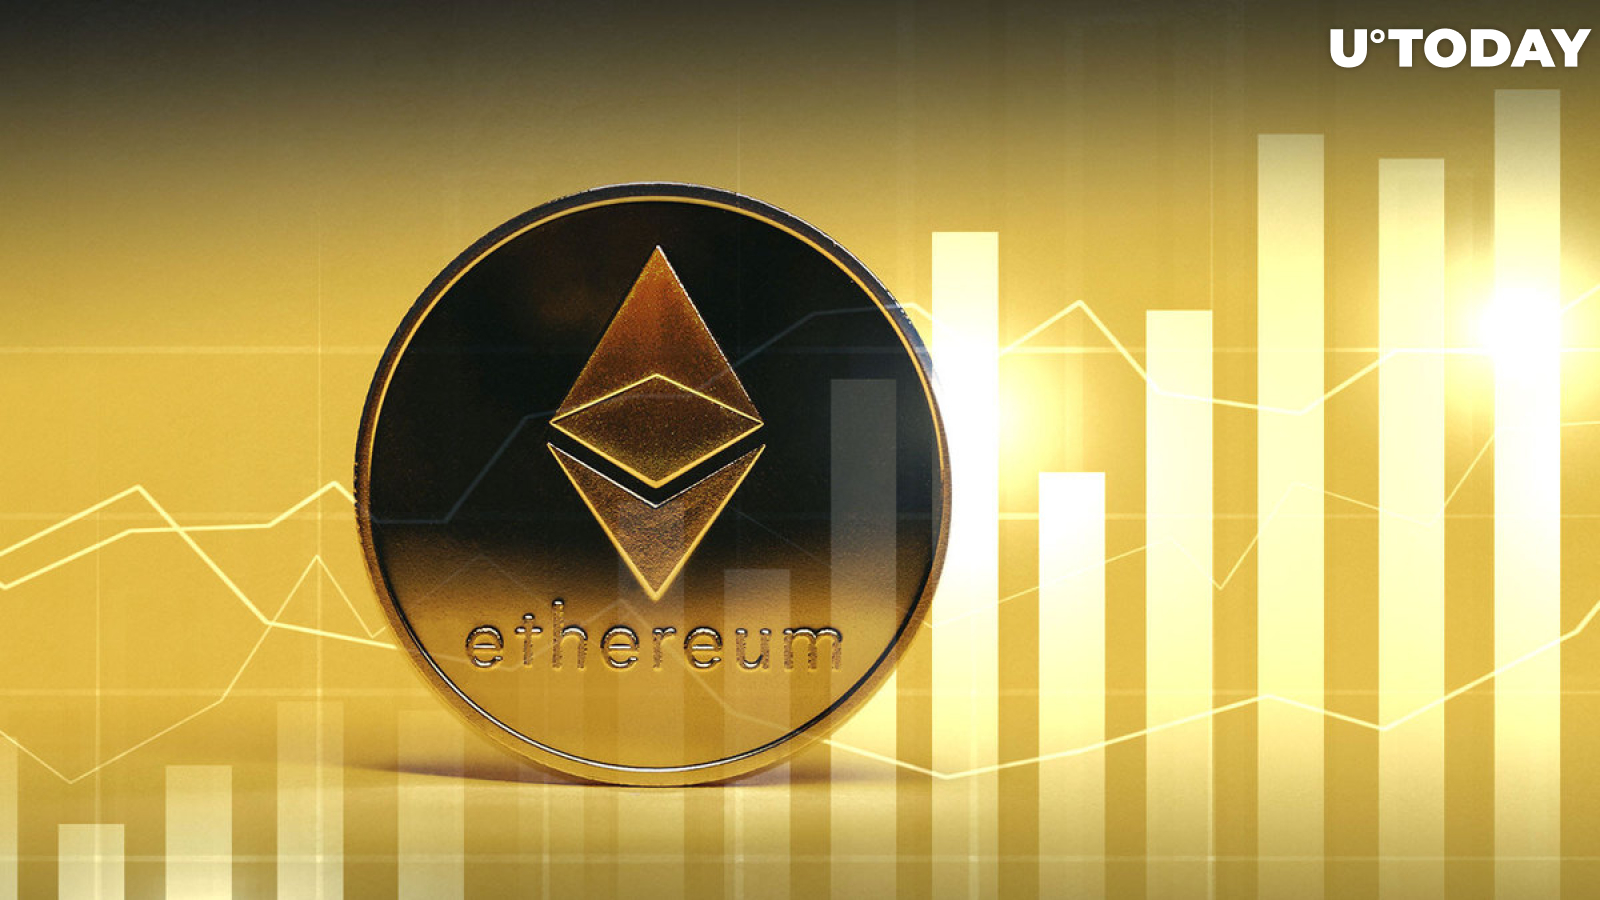 Ethereum (ETH) May Be in for Increased Volatility as When FTX Collapsed: Report